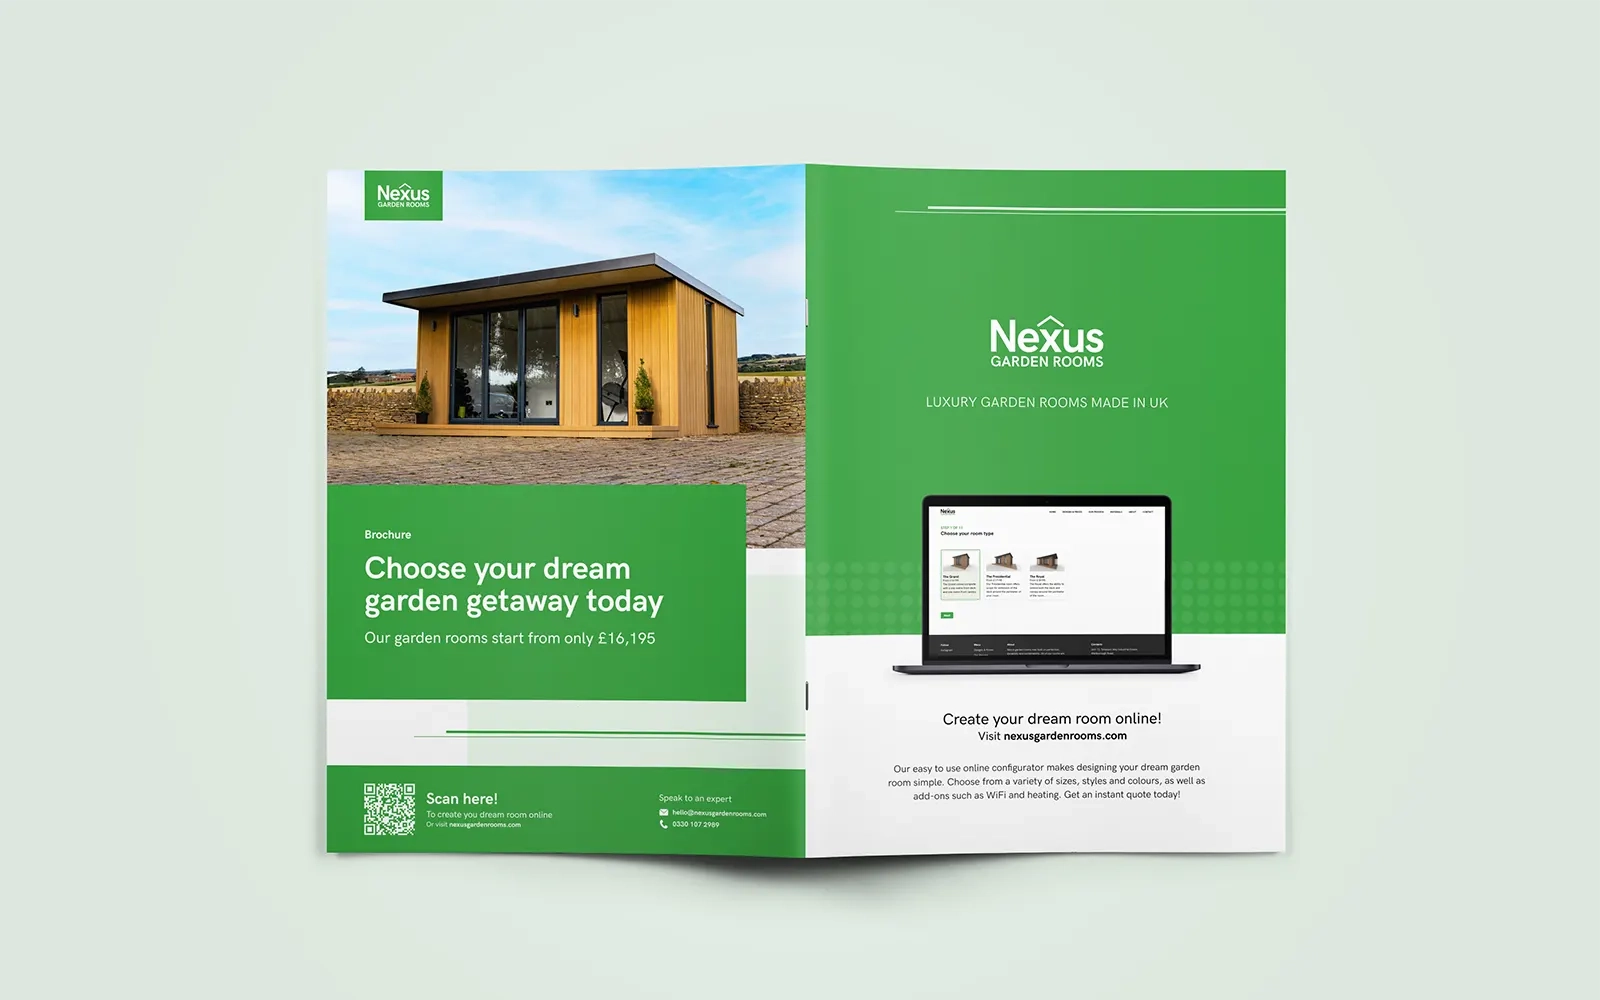 Both the front and back cover of the brochure, showing an example of a previously built garden room and information about the company's online room configurator